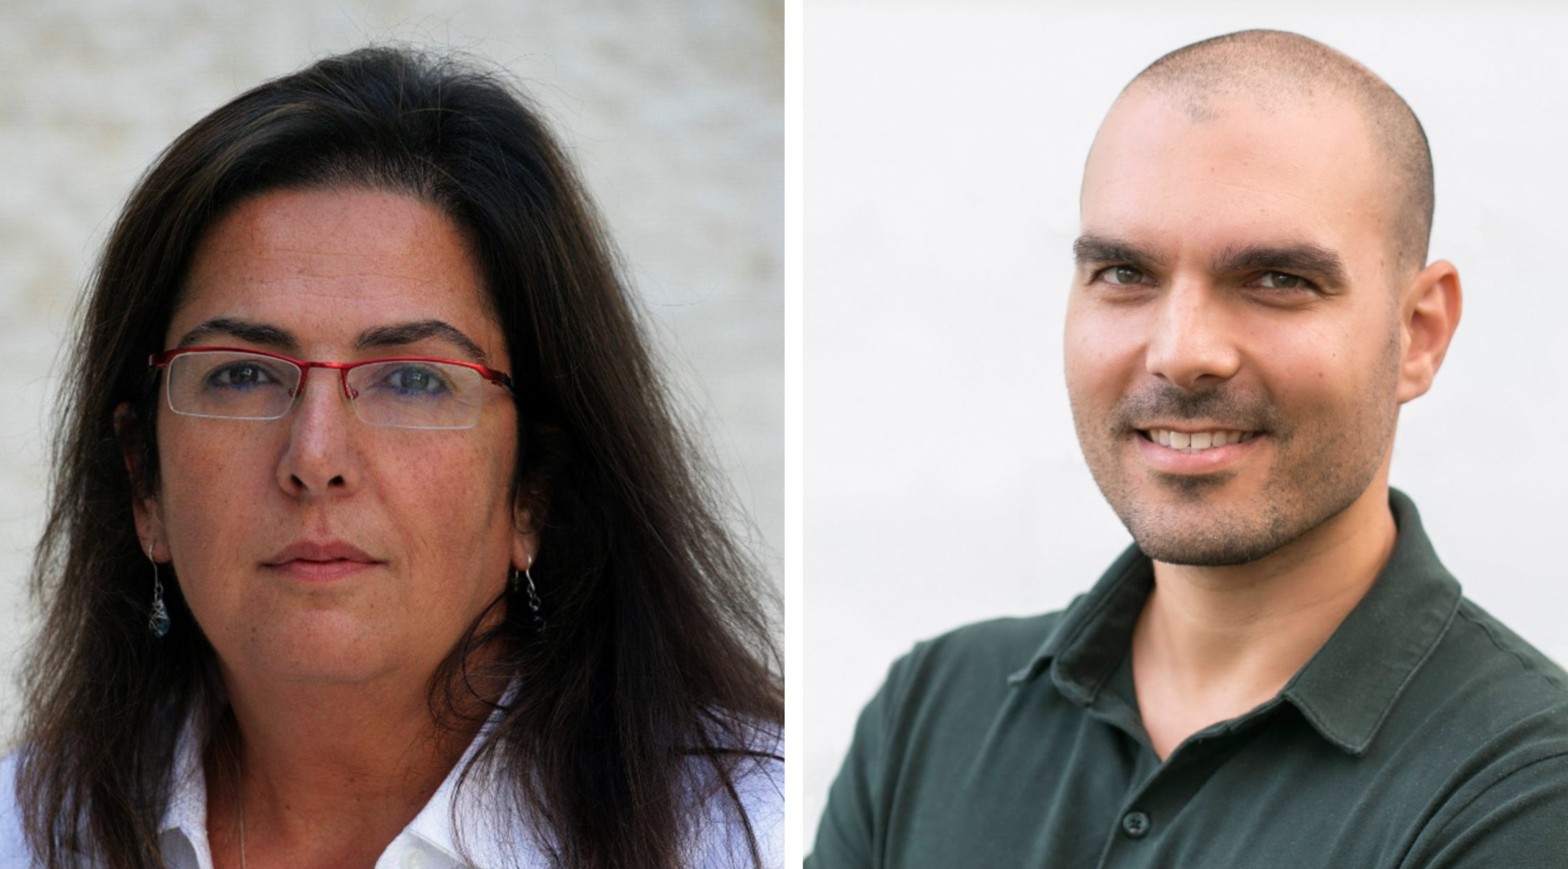 Prof. Marcelle Machluf and PhD student Lior Levy. Photo courtesy of Technion Spokesperson’s Office